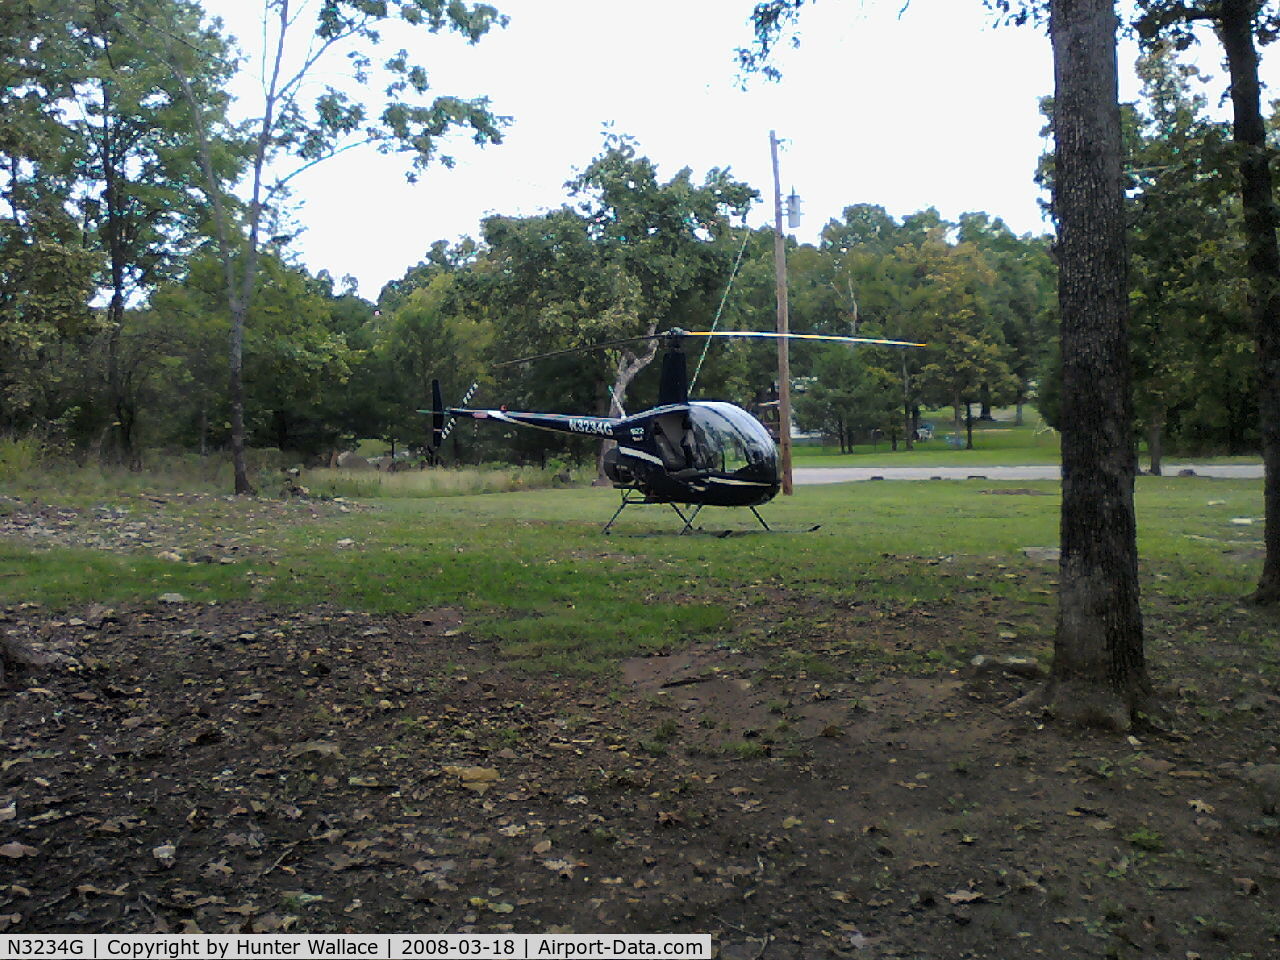 N3234G, 2007 Robinson R22 BETA C/N 4114, Owner was Mark Mahaney now dicesed along with his helicopter